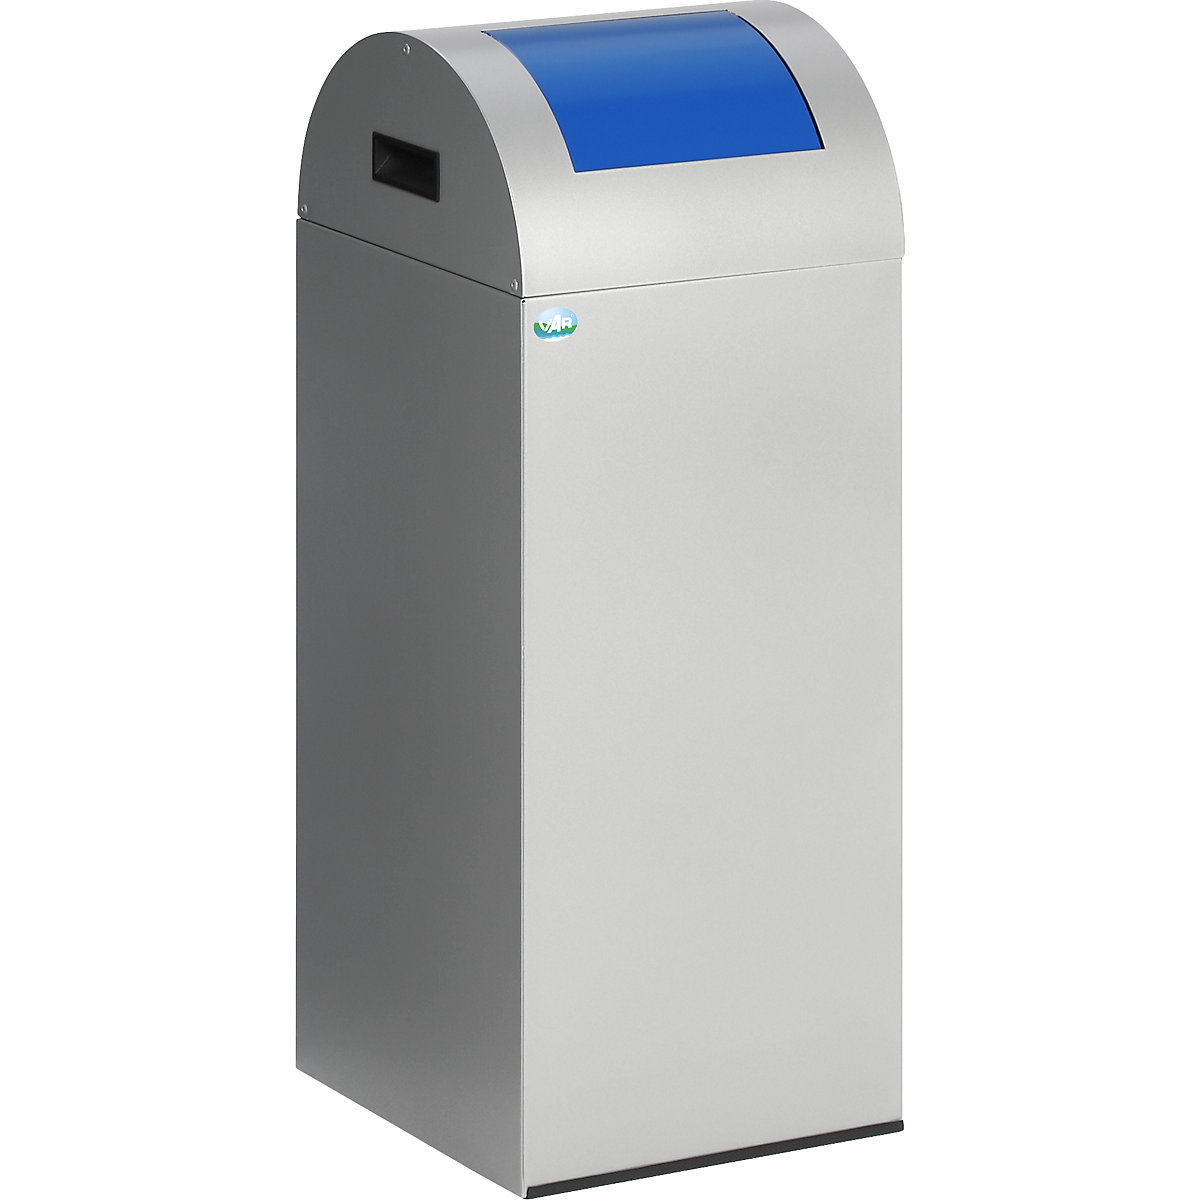 Self extinguishing recyclable waste collector – VAR, capacity 60 l, WxHxD 320 x 800 x 320 mm, antique silver, blue flap-9